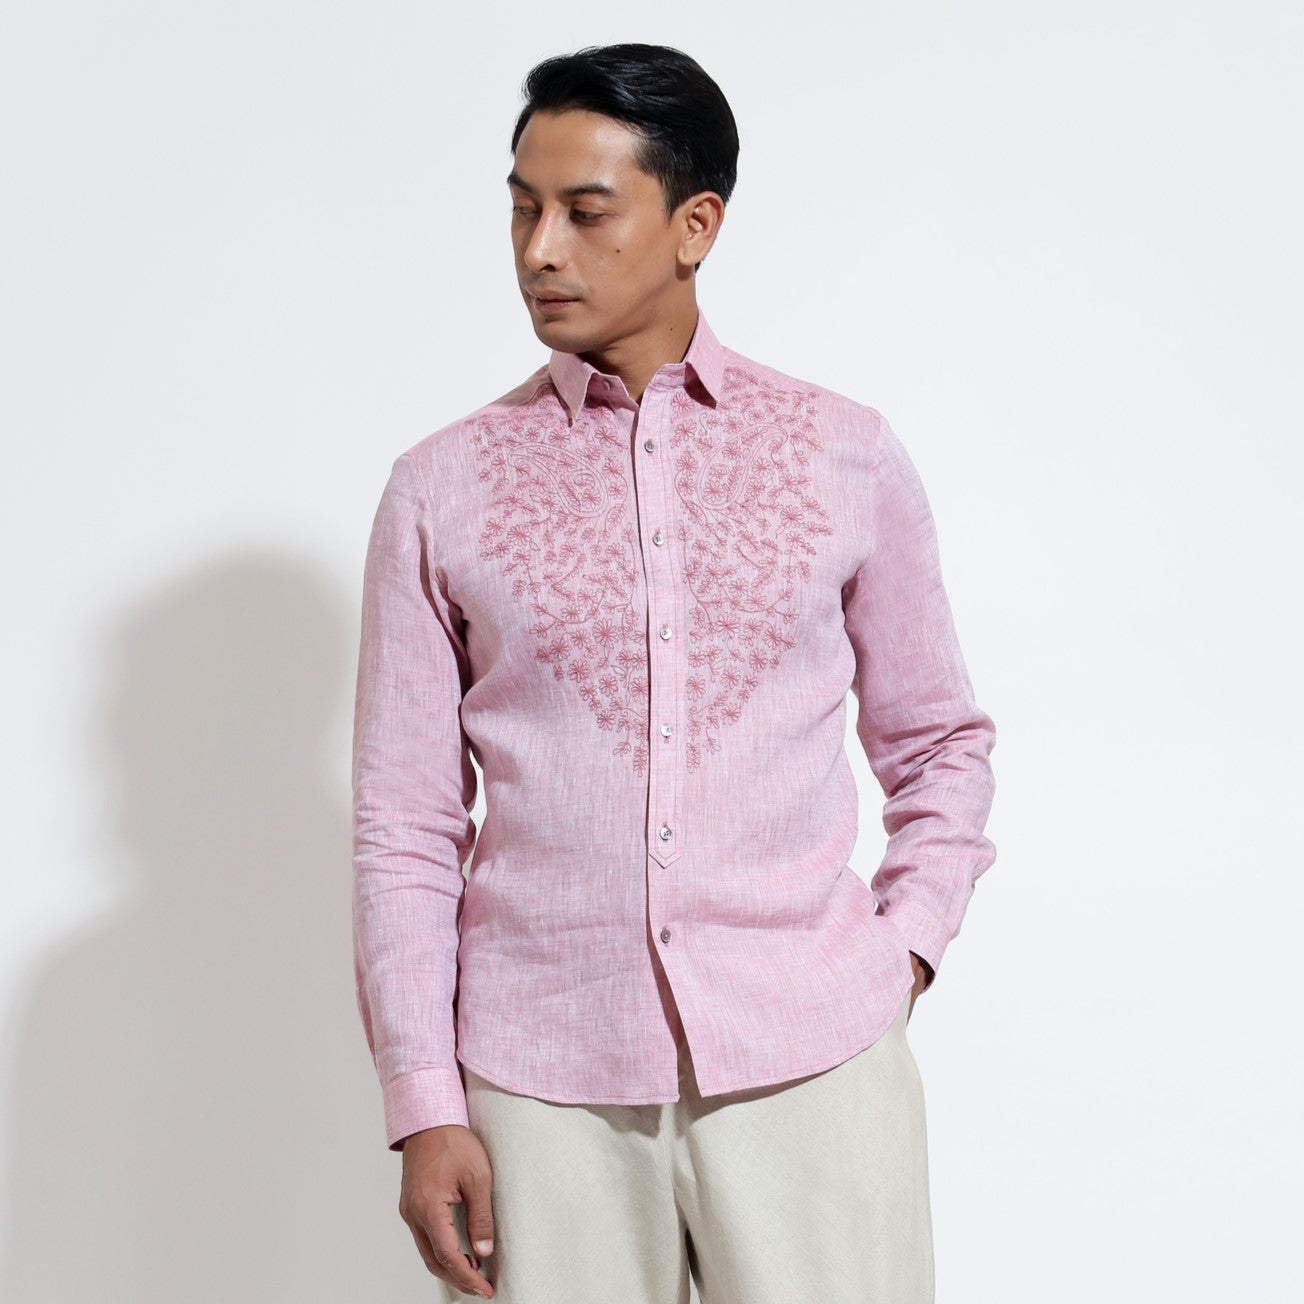 Long sleeve shirt with paisley couching embroidery